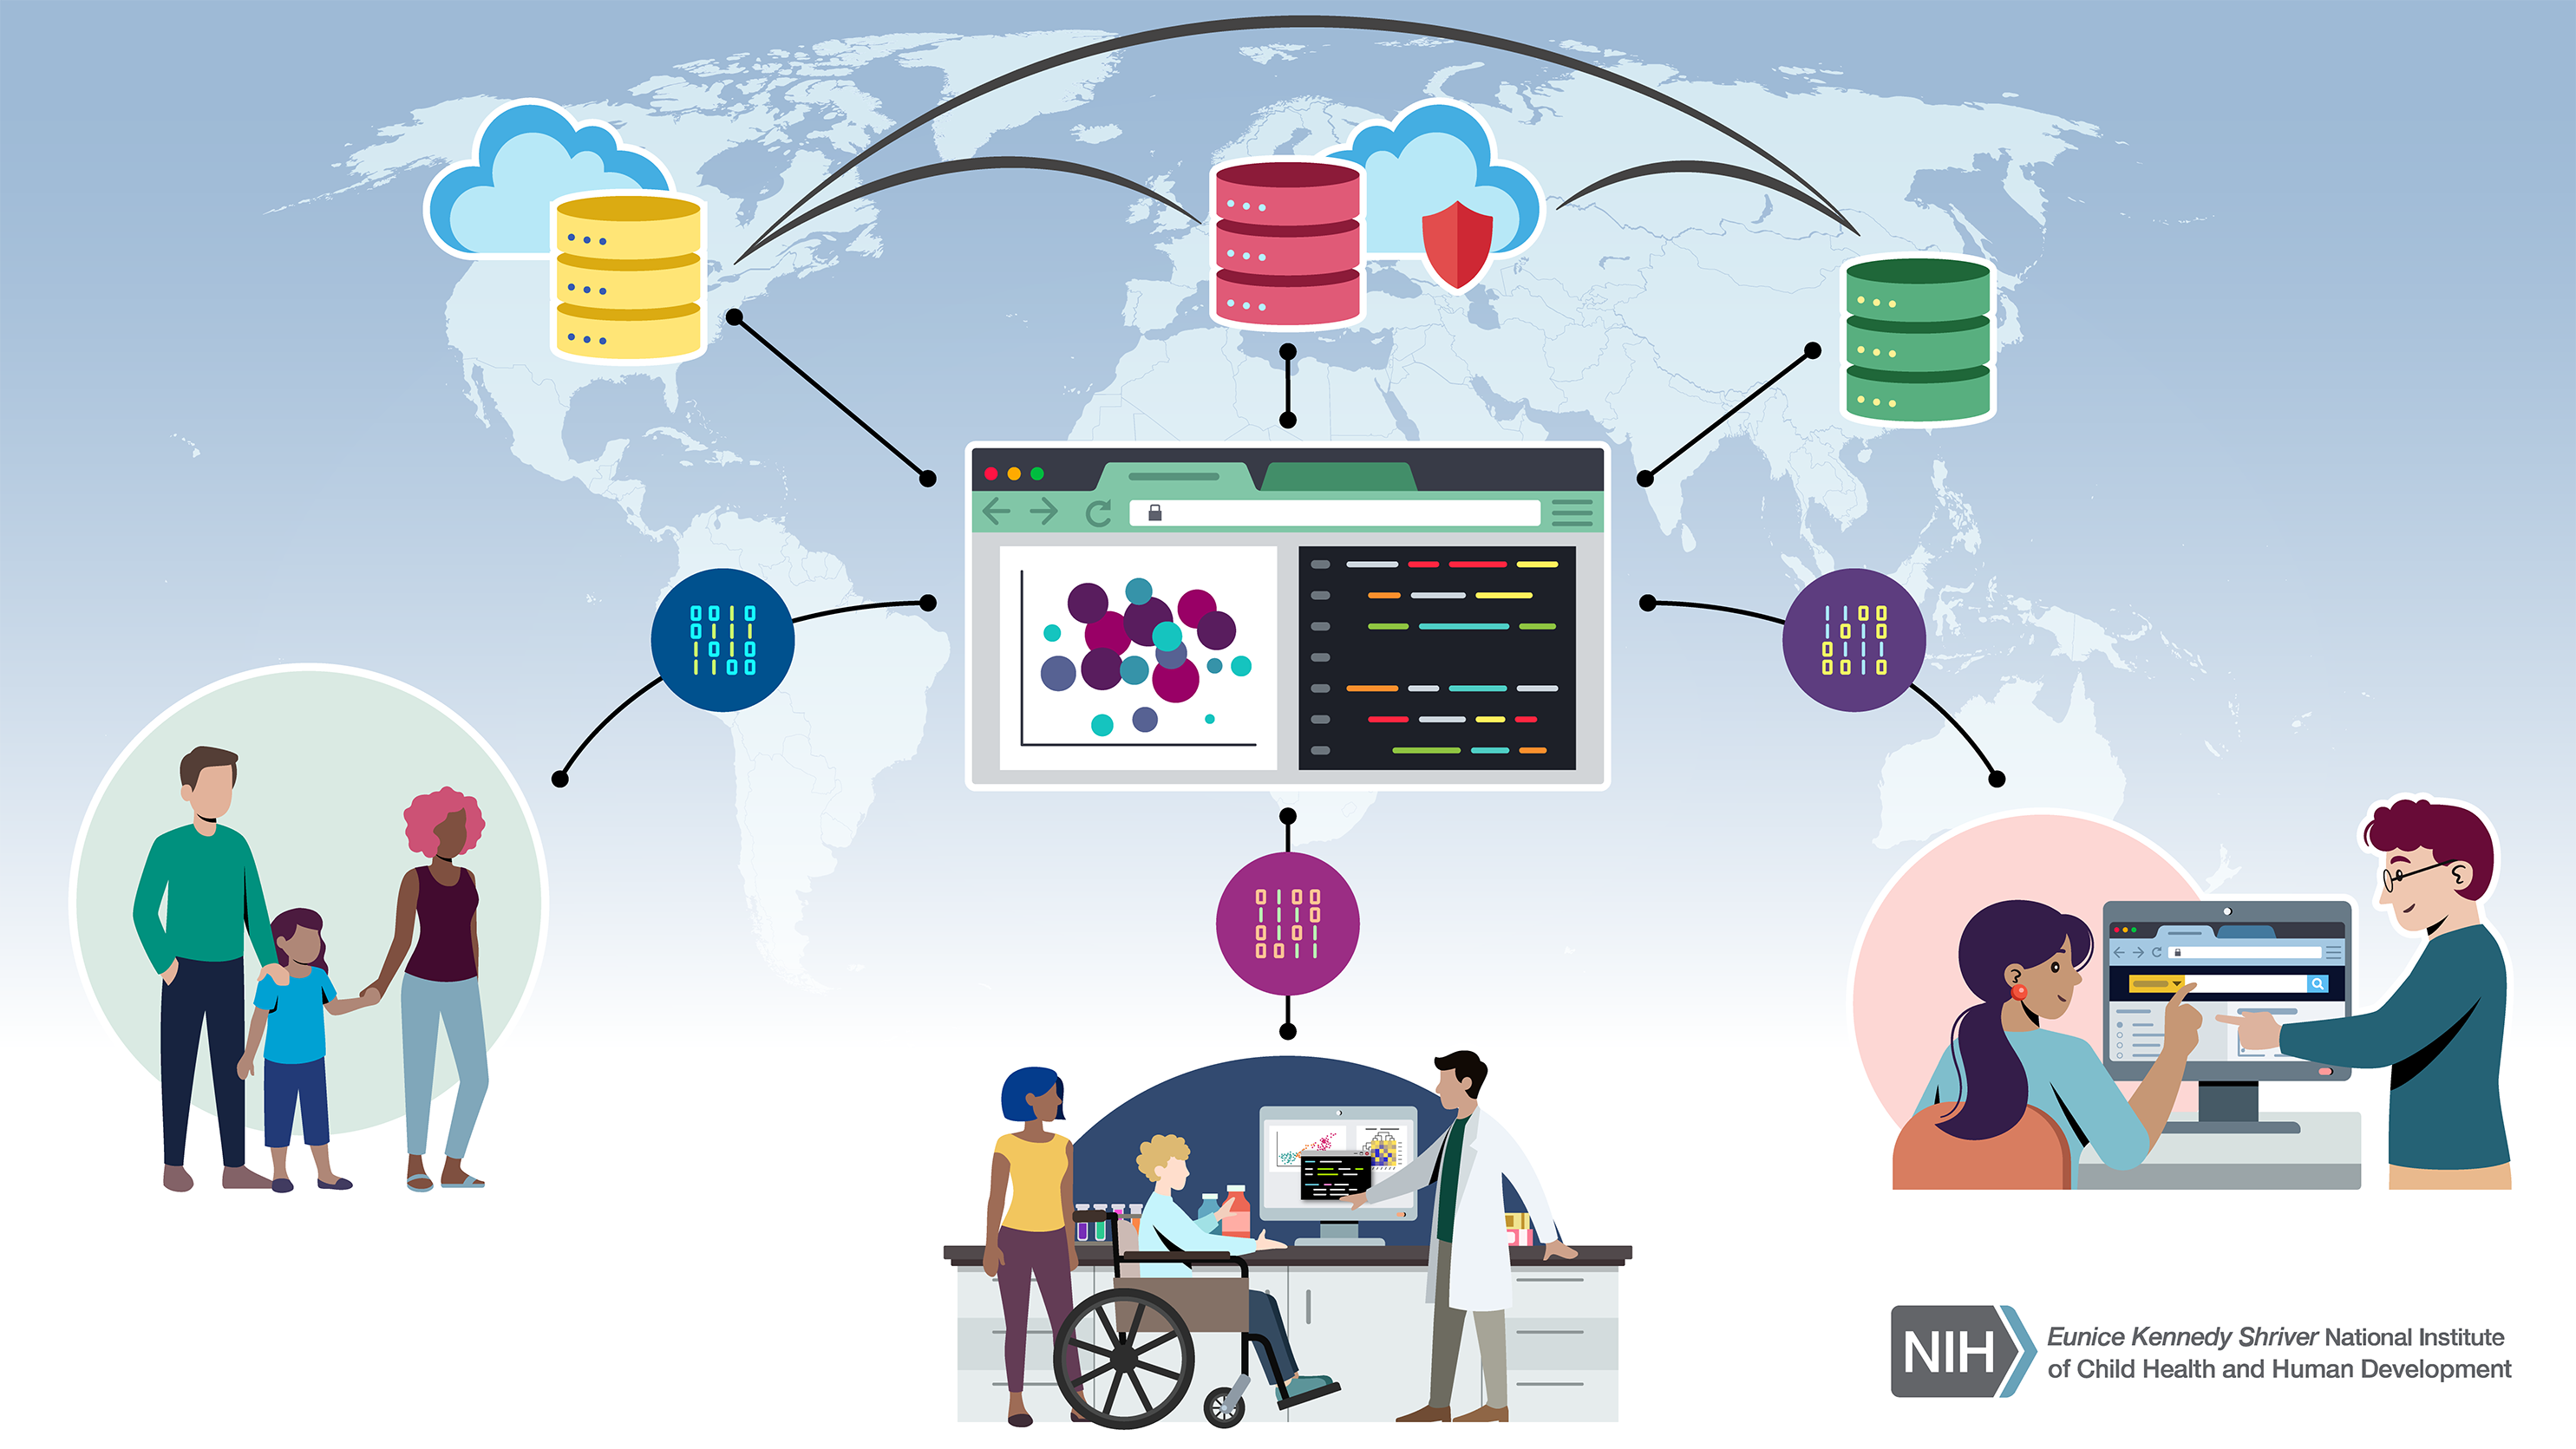 This illustration demonstrates the different levels of NICHD's data ecosystem. Data collected through NICHD research is de-identified, submitted to our Data and Specimen Hub (DASH), and stored on cloud servers that utilize top-level data encryption and security software. To make the data accessible in DASH and beyond, we support websites and applications that provide easy-to-navigate interfaces and search options for online visitors. These visitors can include members of the public, the scientific community, educators, and other researchers seeking information.